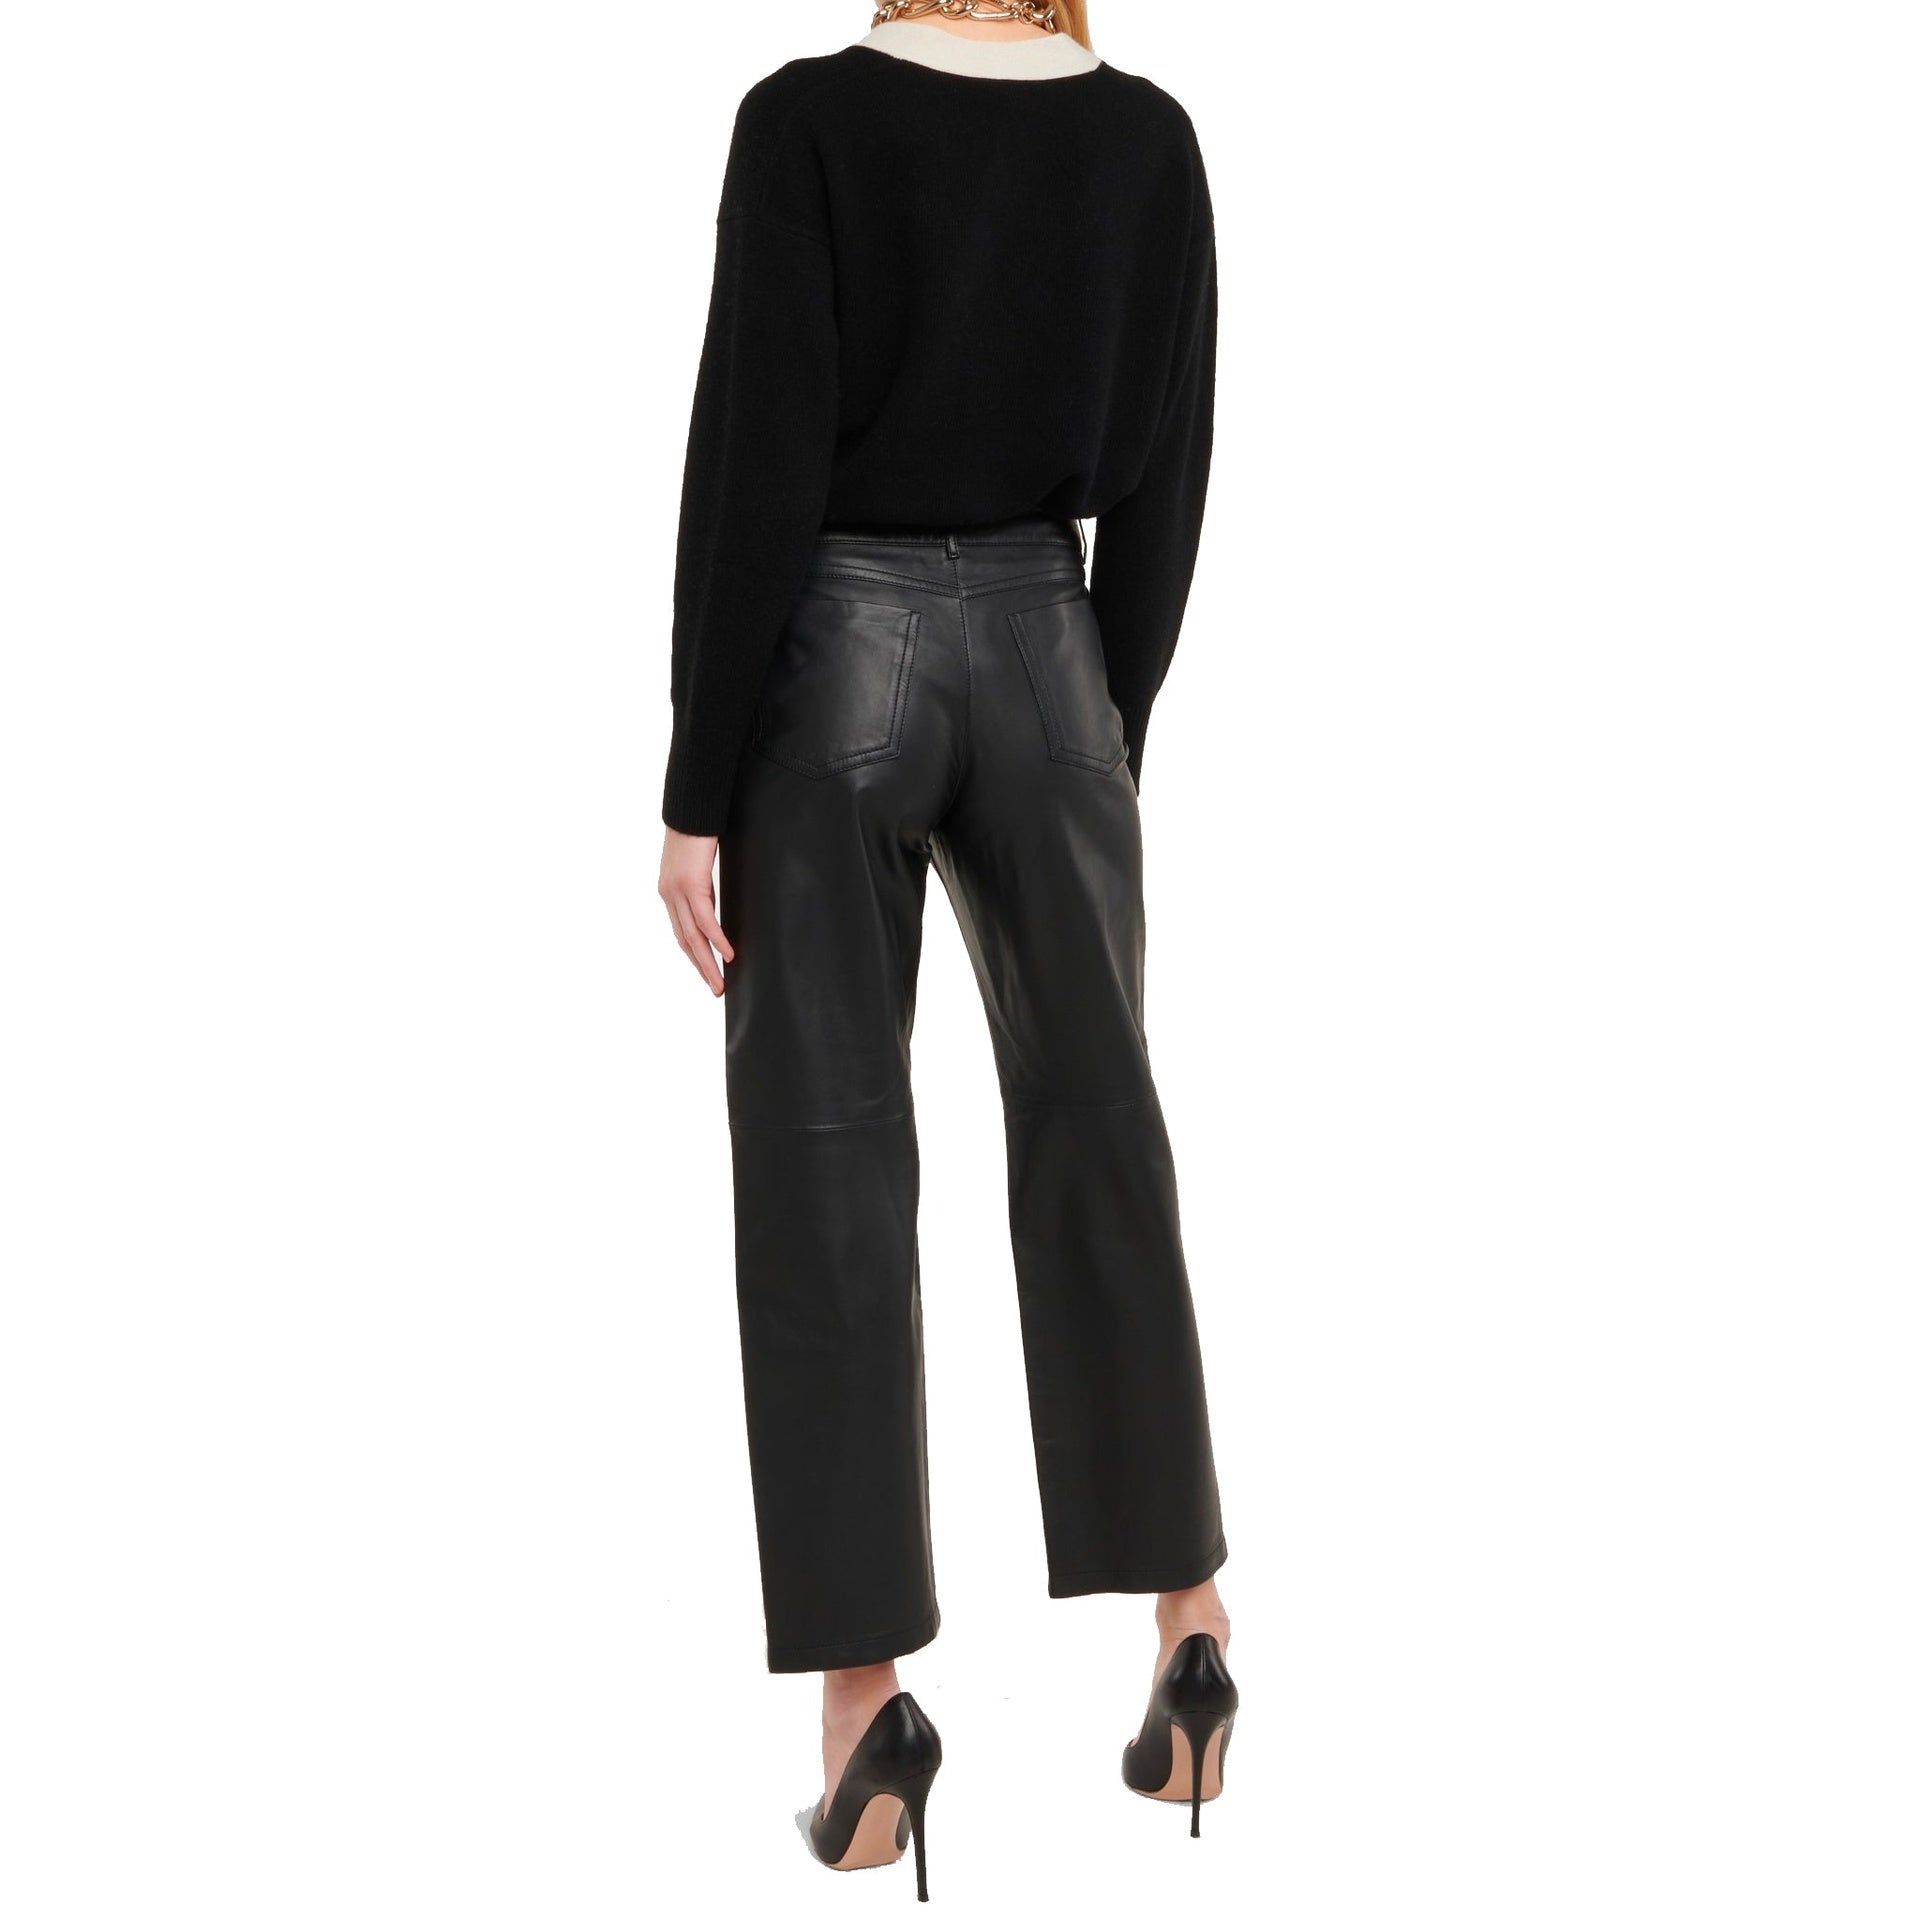 S-MAX-MARA-OUTLET-SALE-s-Max-Mara-Liana-Leather-Pants-Hosen-ARCHIVE-COLLECTION-3.jpg